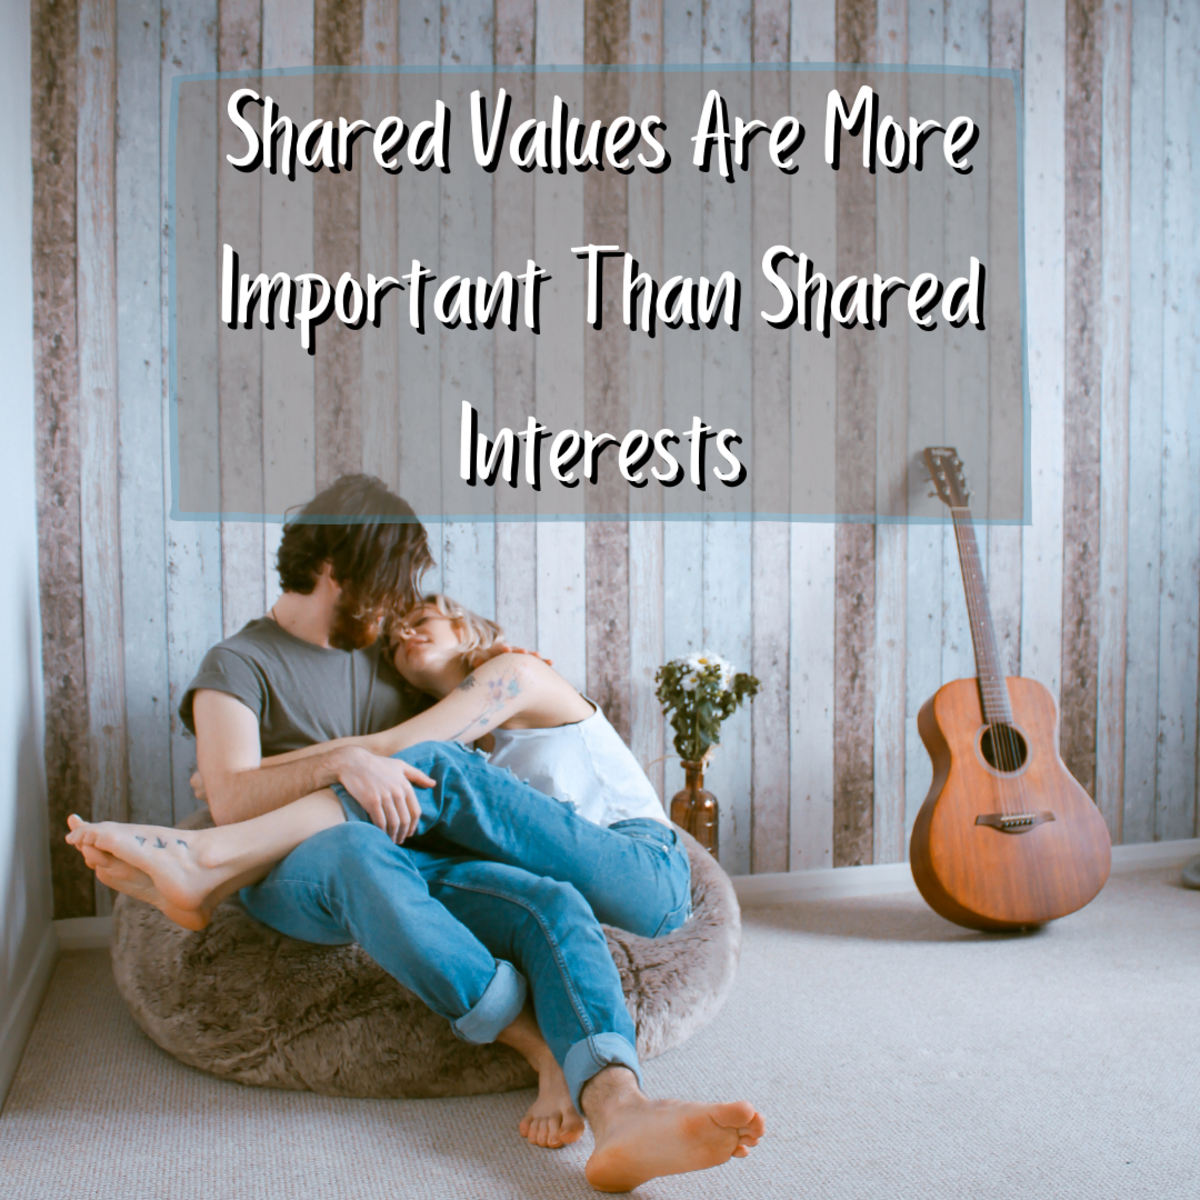 What Is Most Important in Relationships? Interests or Values?